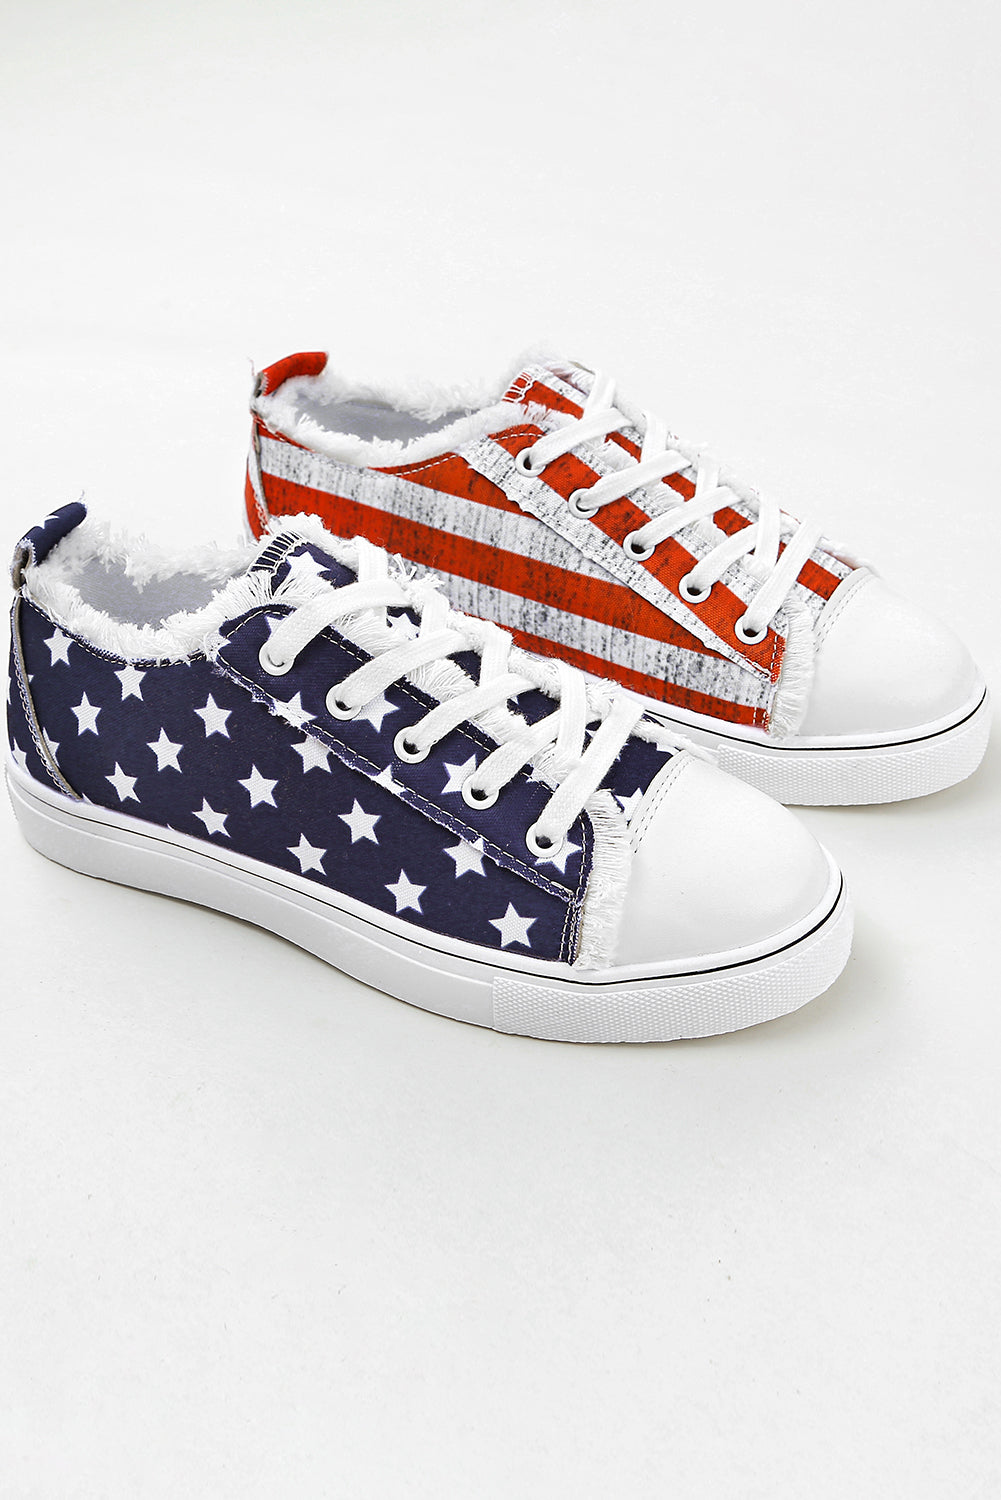 a pair of white and red sneakers with stars on them